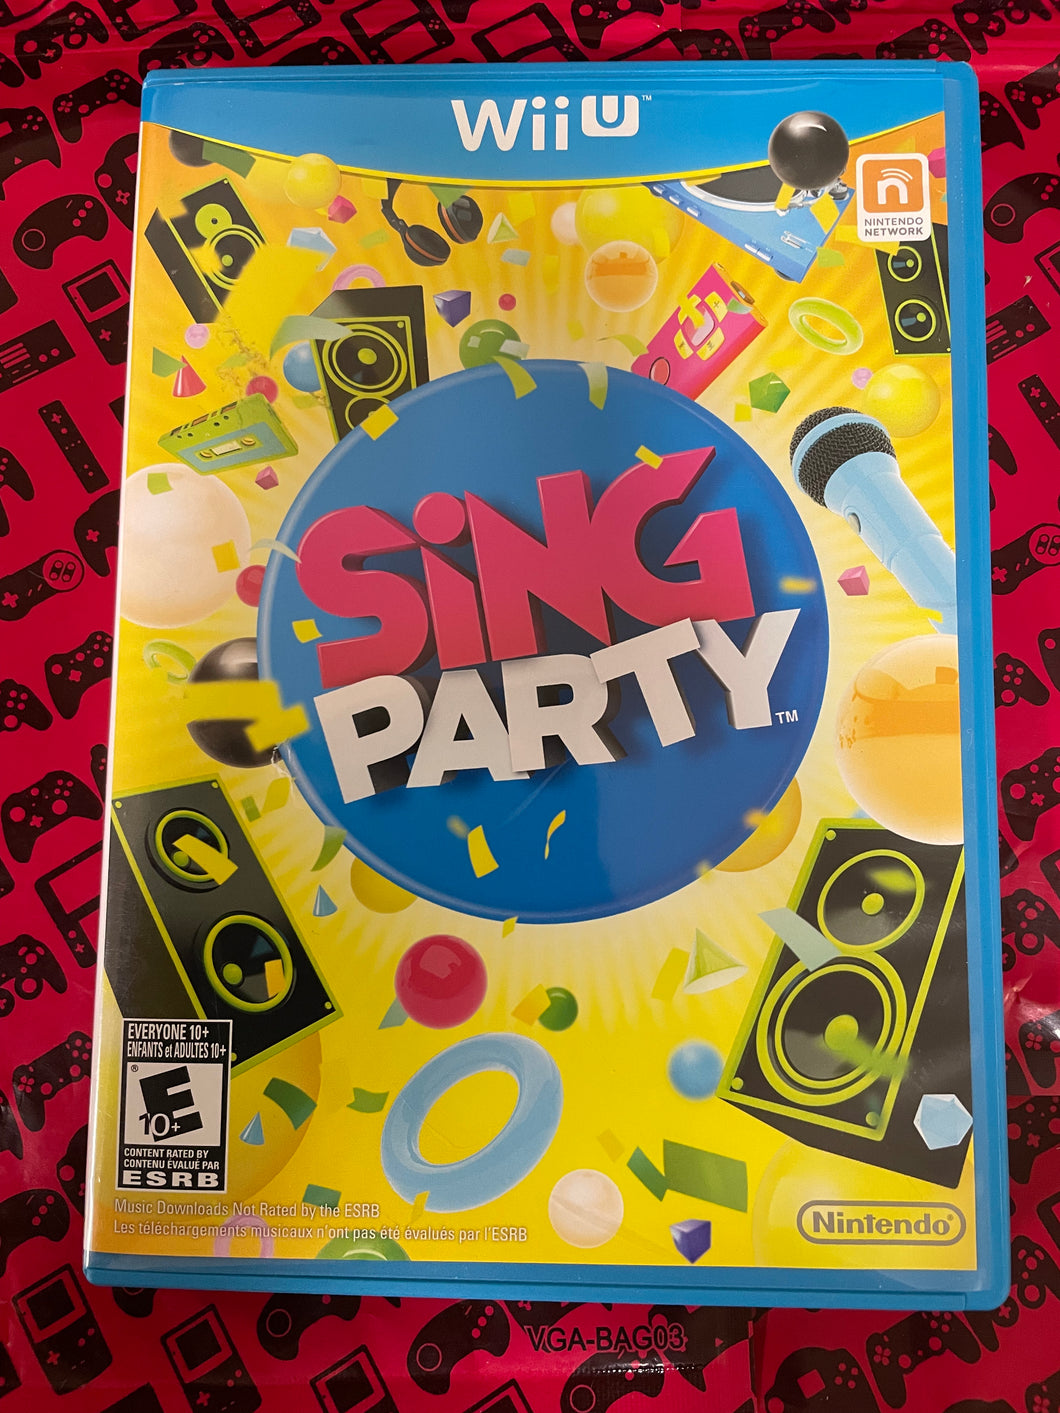 Sing Party Wii U Complete